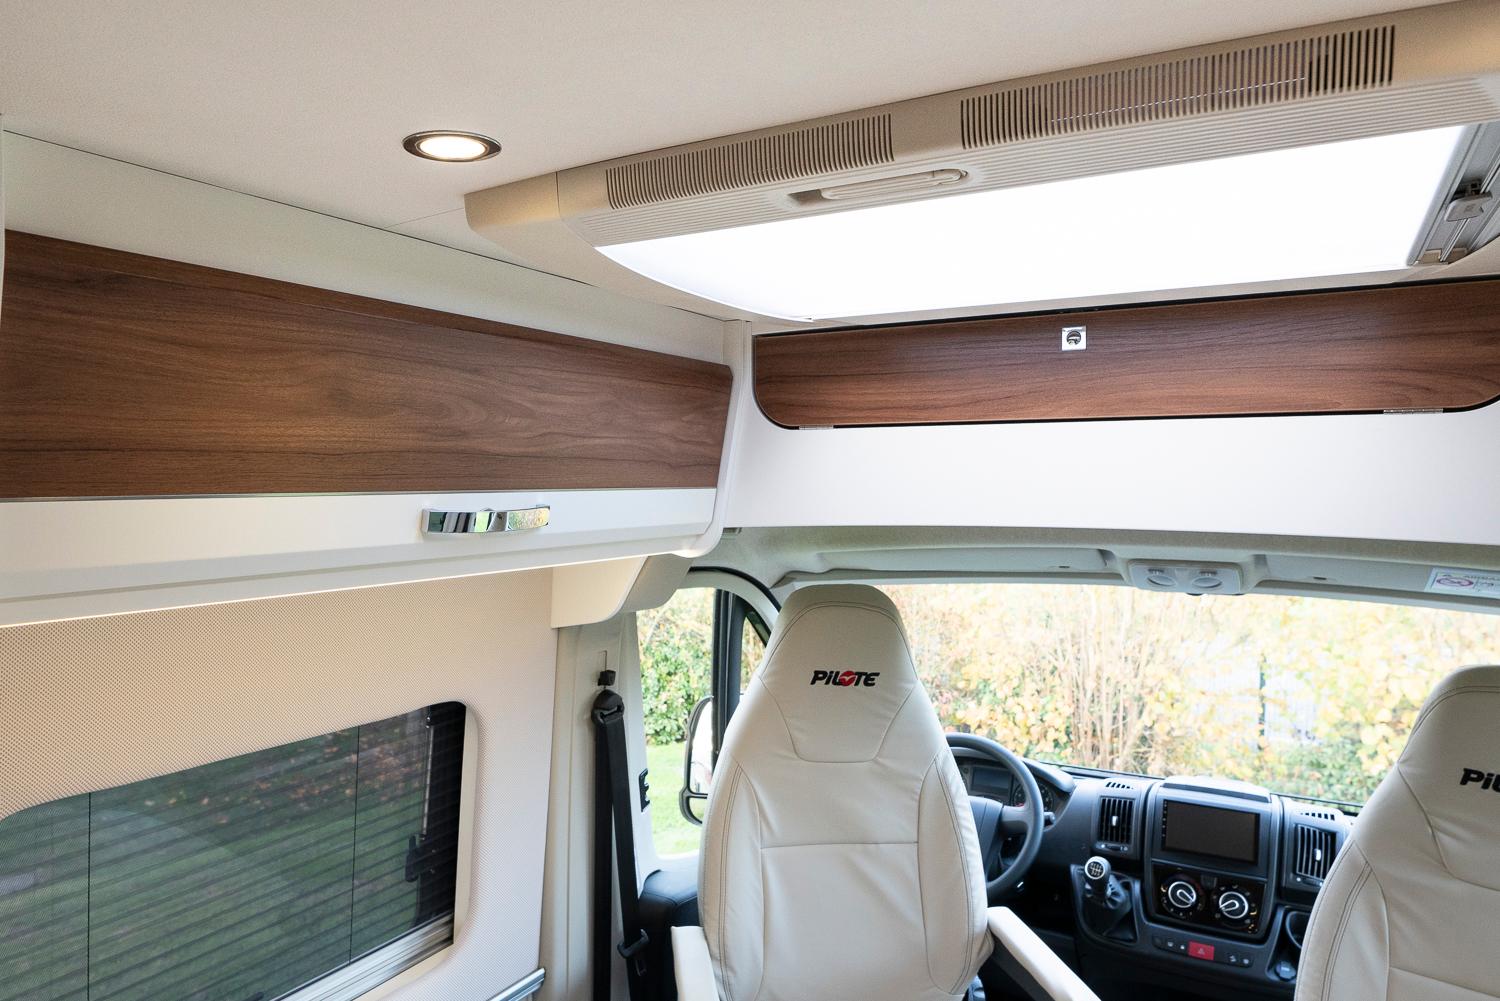 Pilote will satisfy your hunger for camper vans – image 2